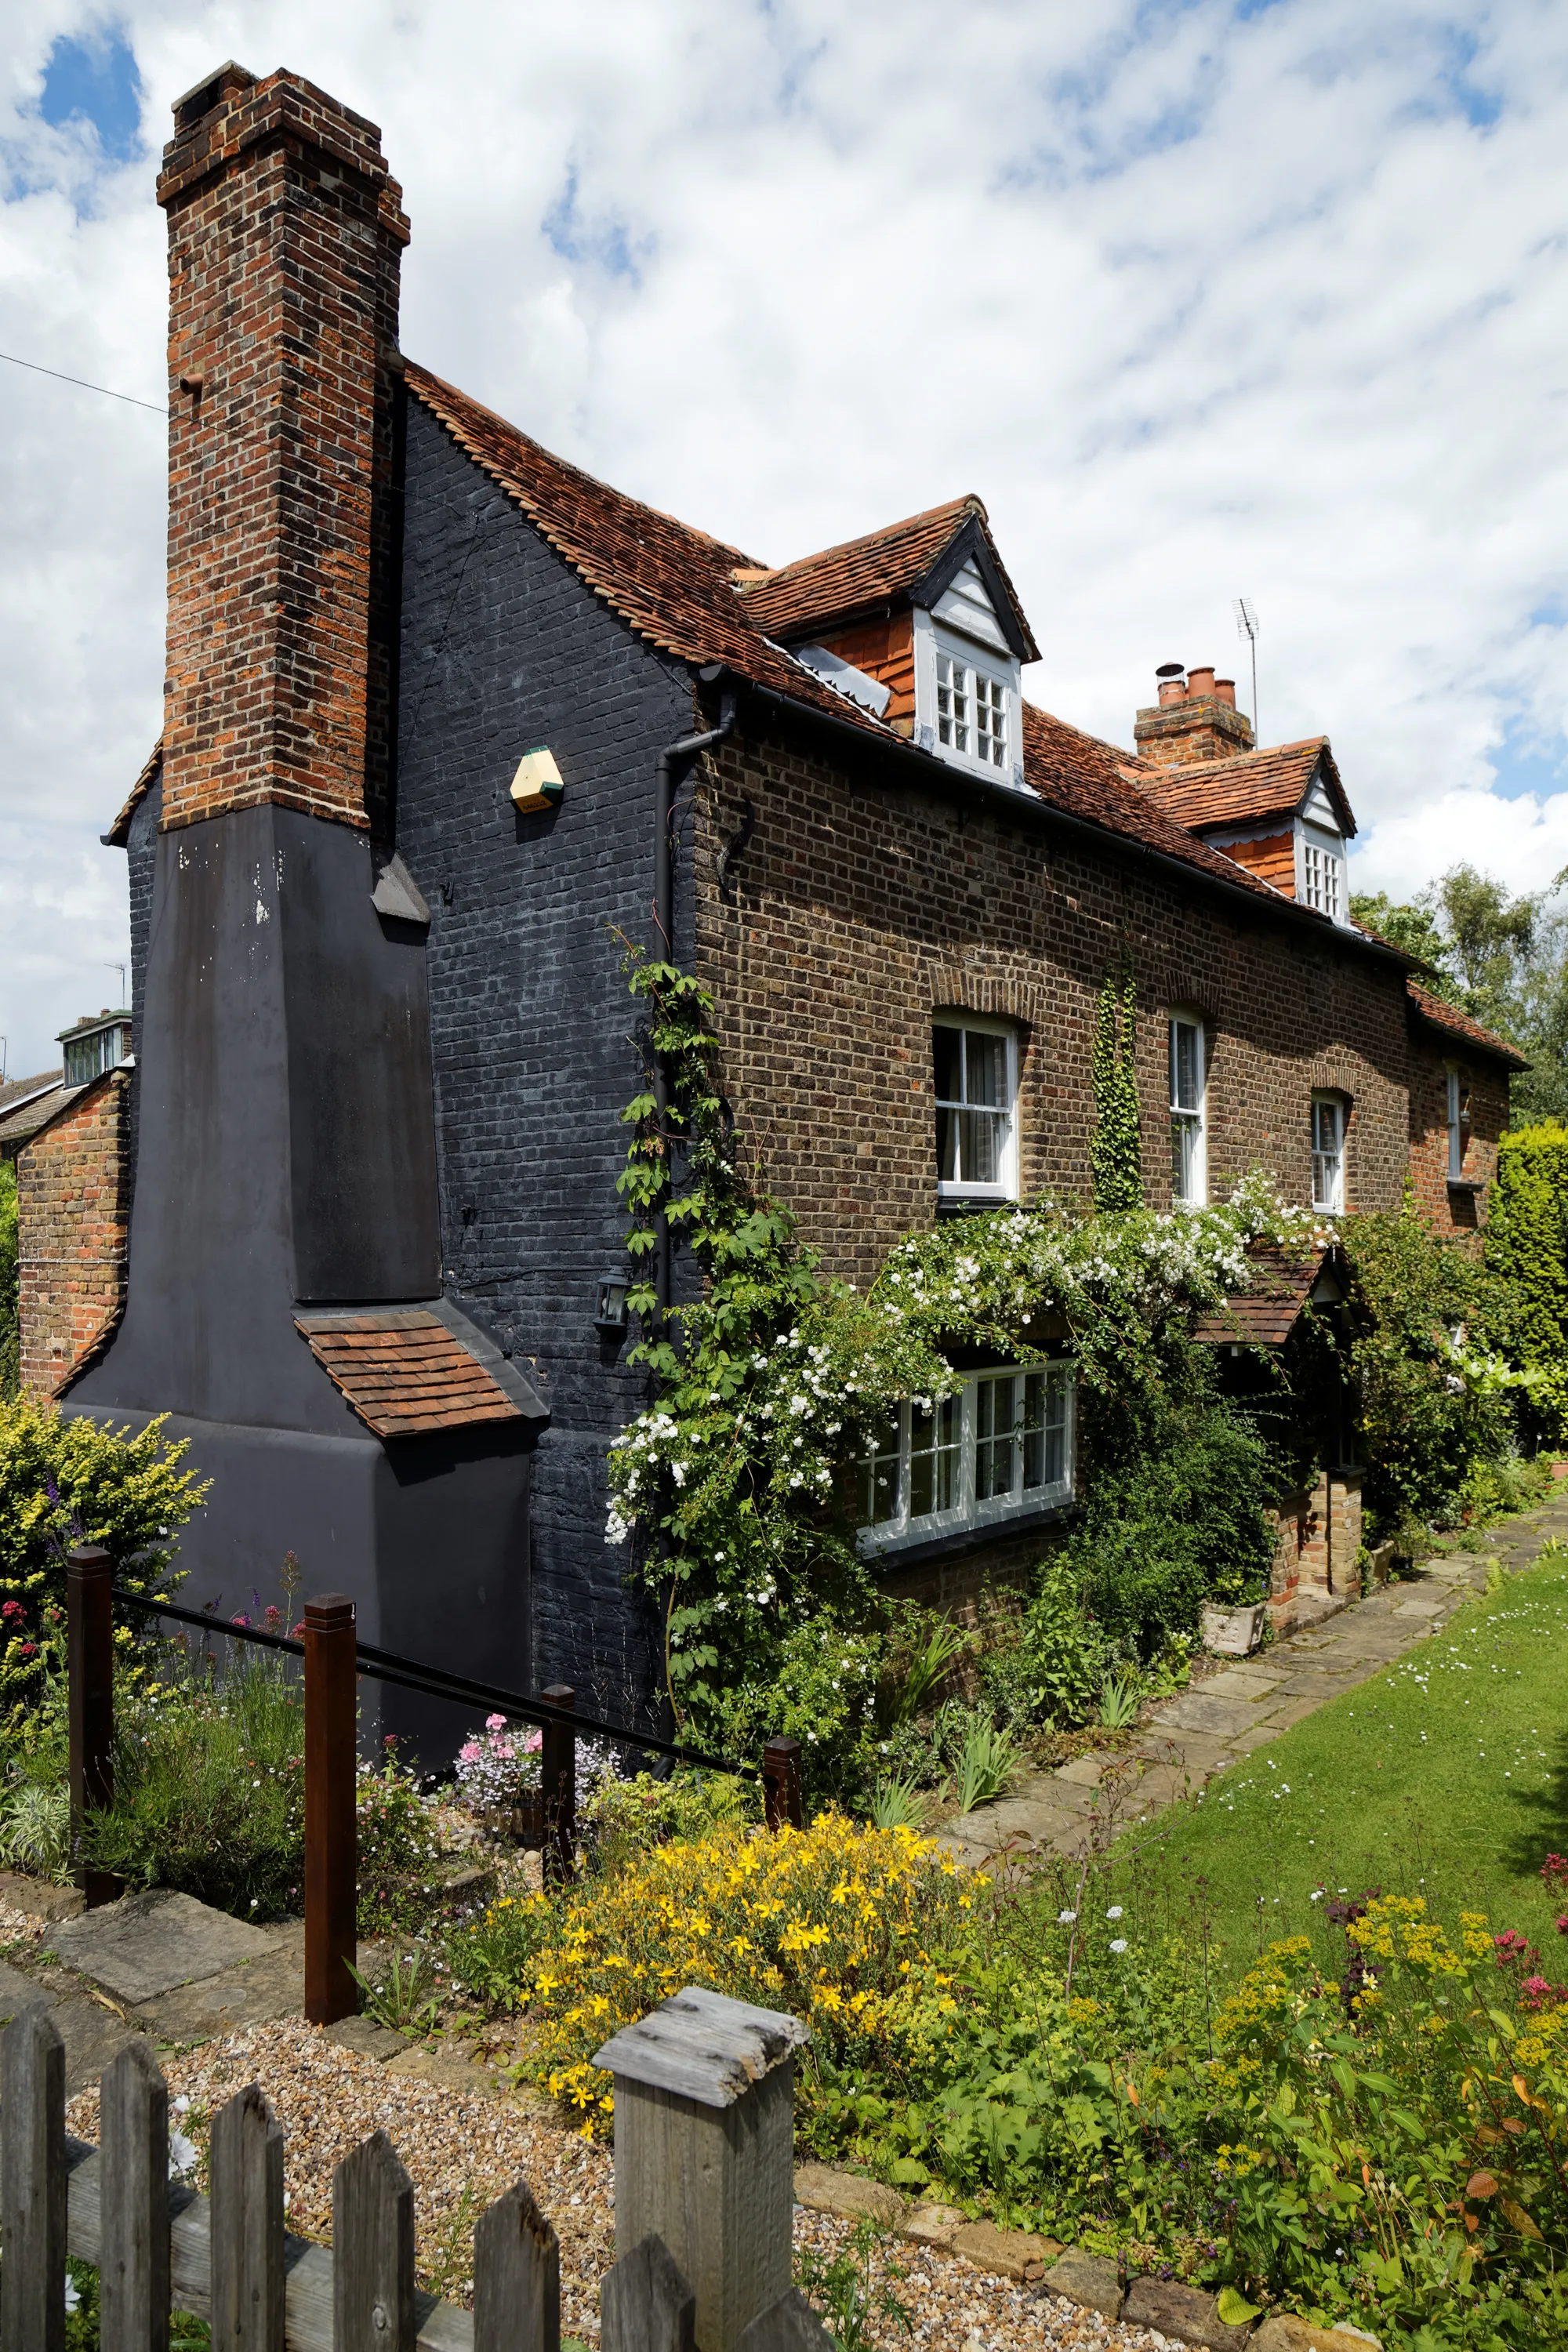 Photo showing: The Grade II listed 17- 18th-century 'Catsford Cottage' at 43 Newgate Street Village (name of road), at Newgate Street, in the civil parish of Hatfield, and the Borough of Welwyn Hatfield, Hertfordshire, England. Camera: Camera: Canon EOS 6D with Canon EF 24-105mm F4L IS USM lens. Software: file lens-corrected and optimized with DxO OpticsPro 10 Elite and Viewpoint 2, and further optimized with Adobe Photoshop CS2.